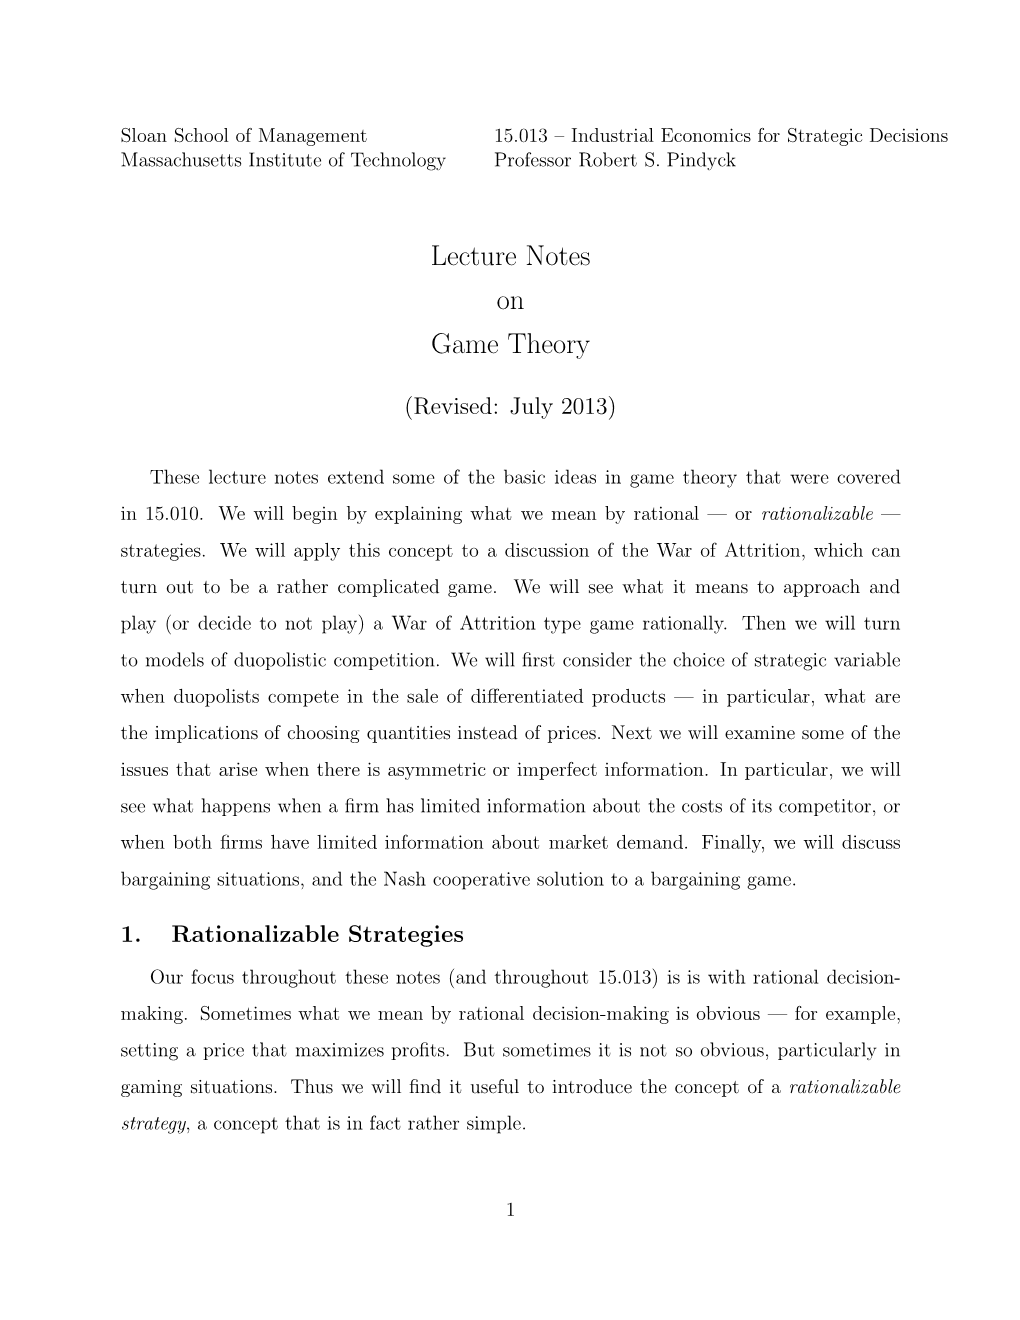 Lecture Notes on Game Theory